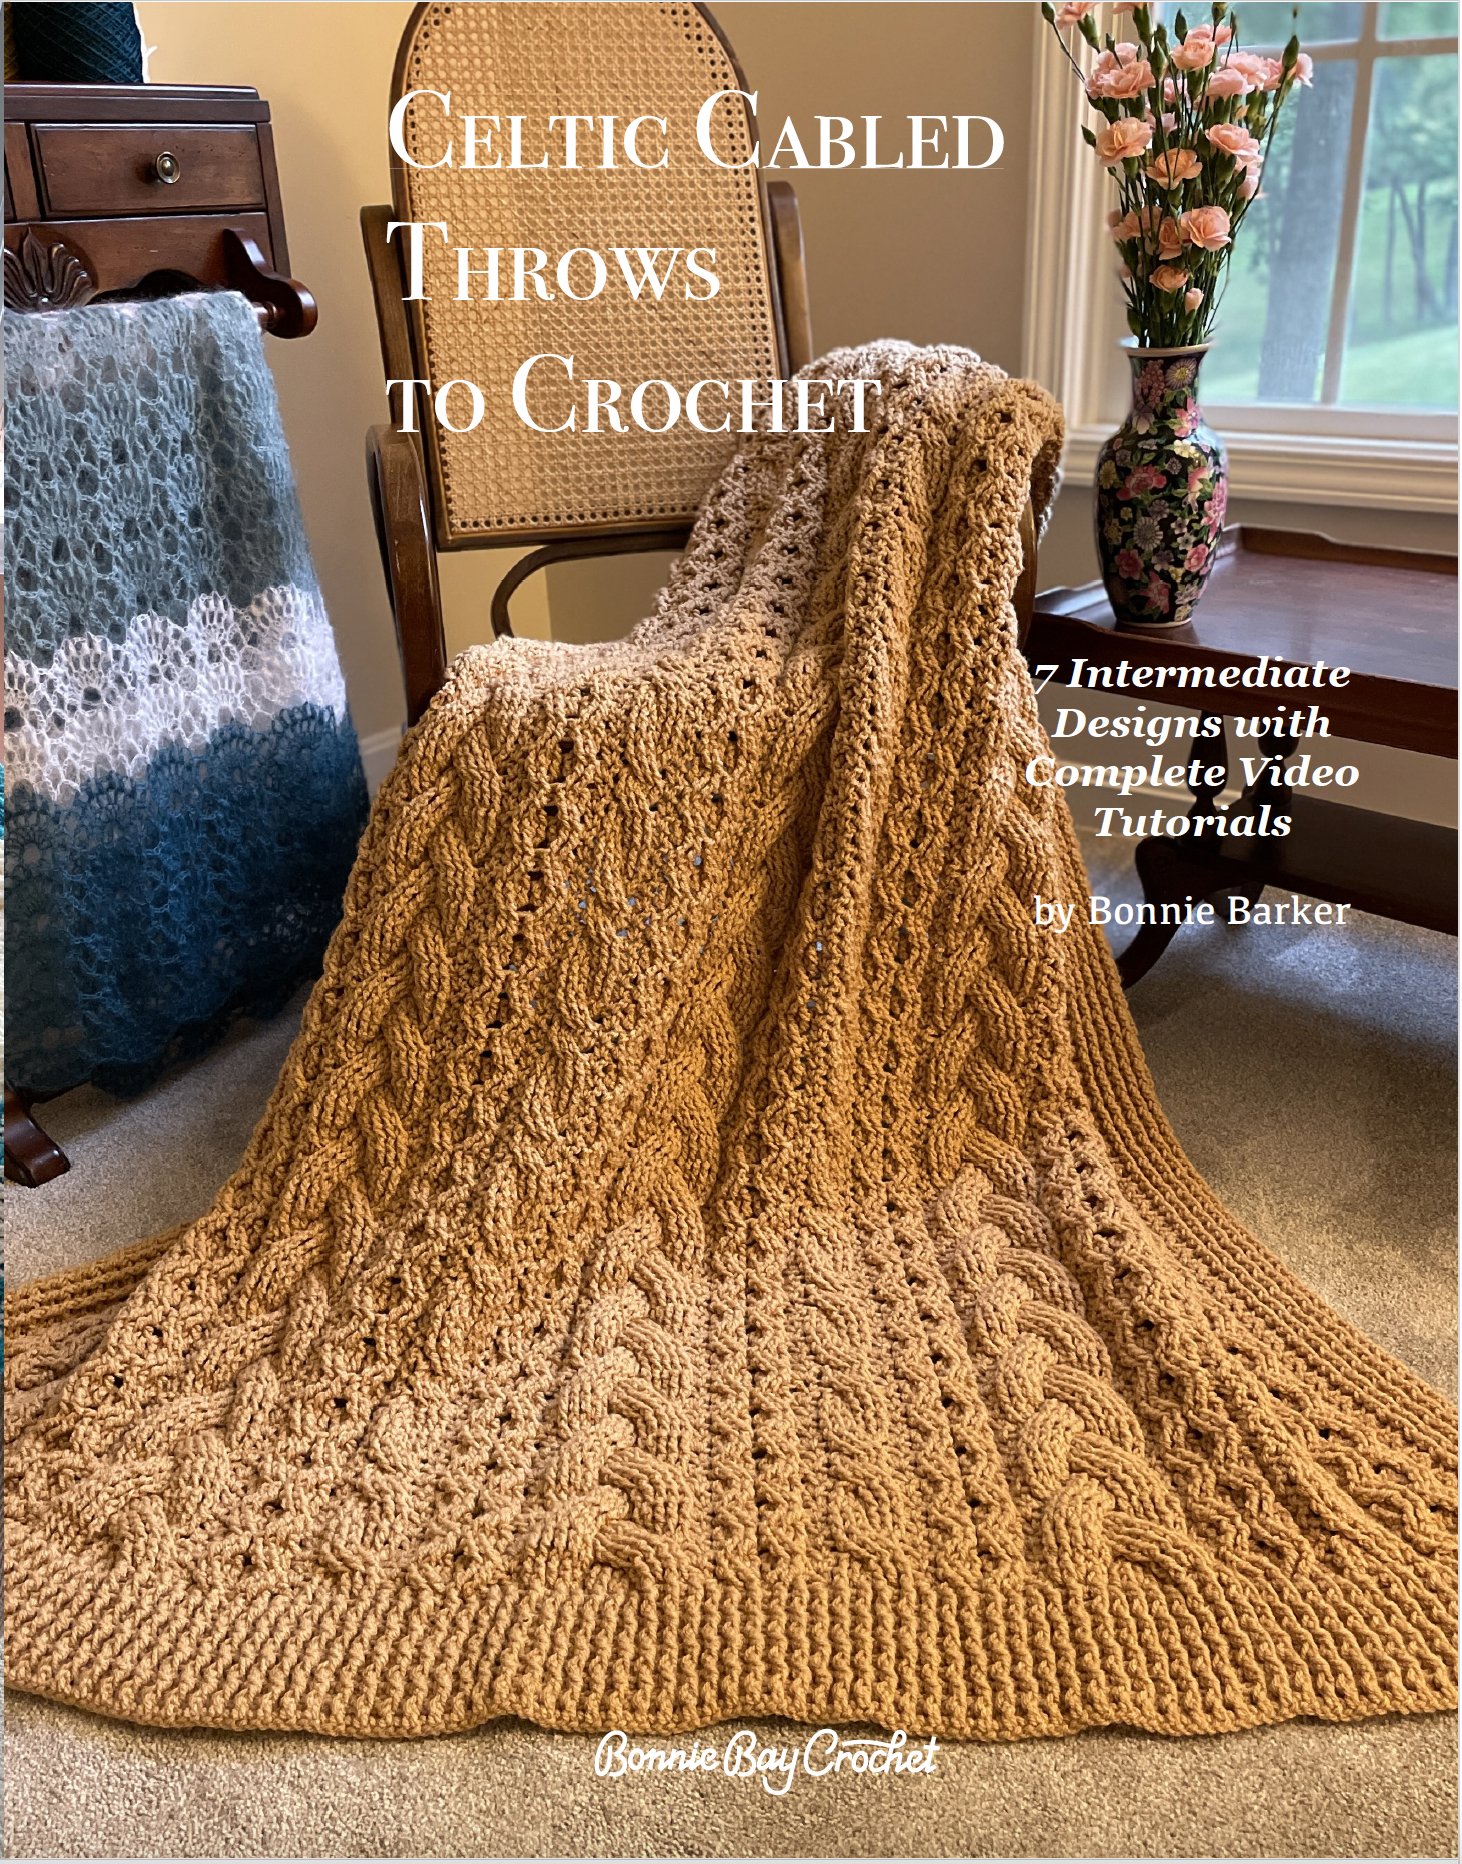 Celtic Cabled Throws to Crochet